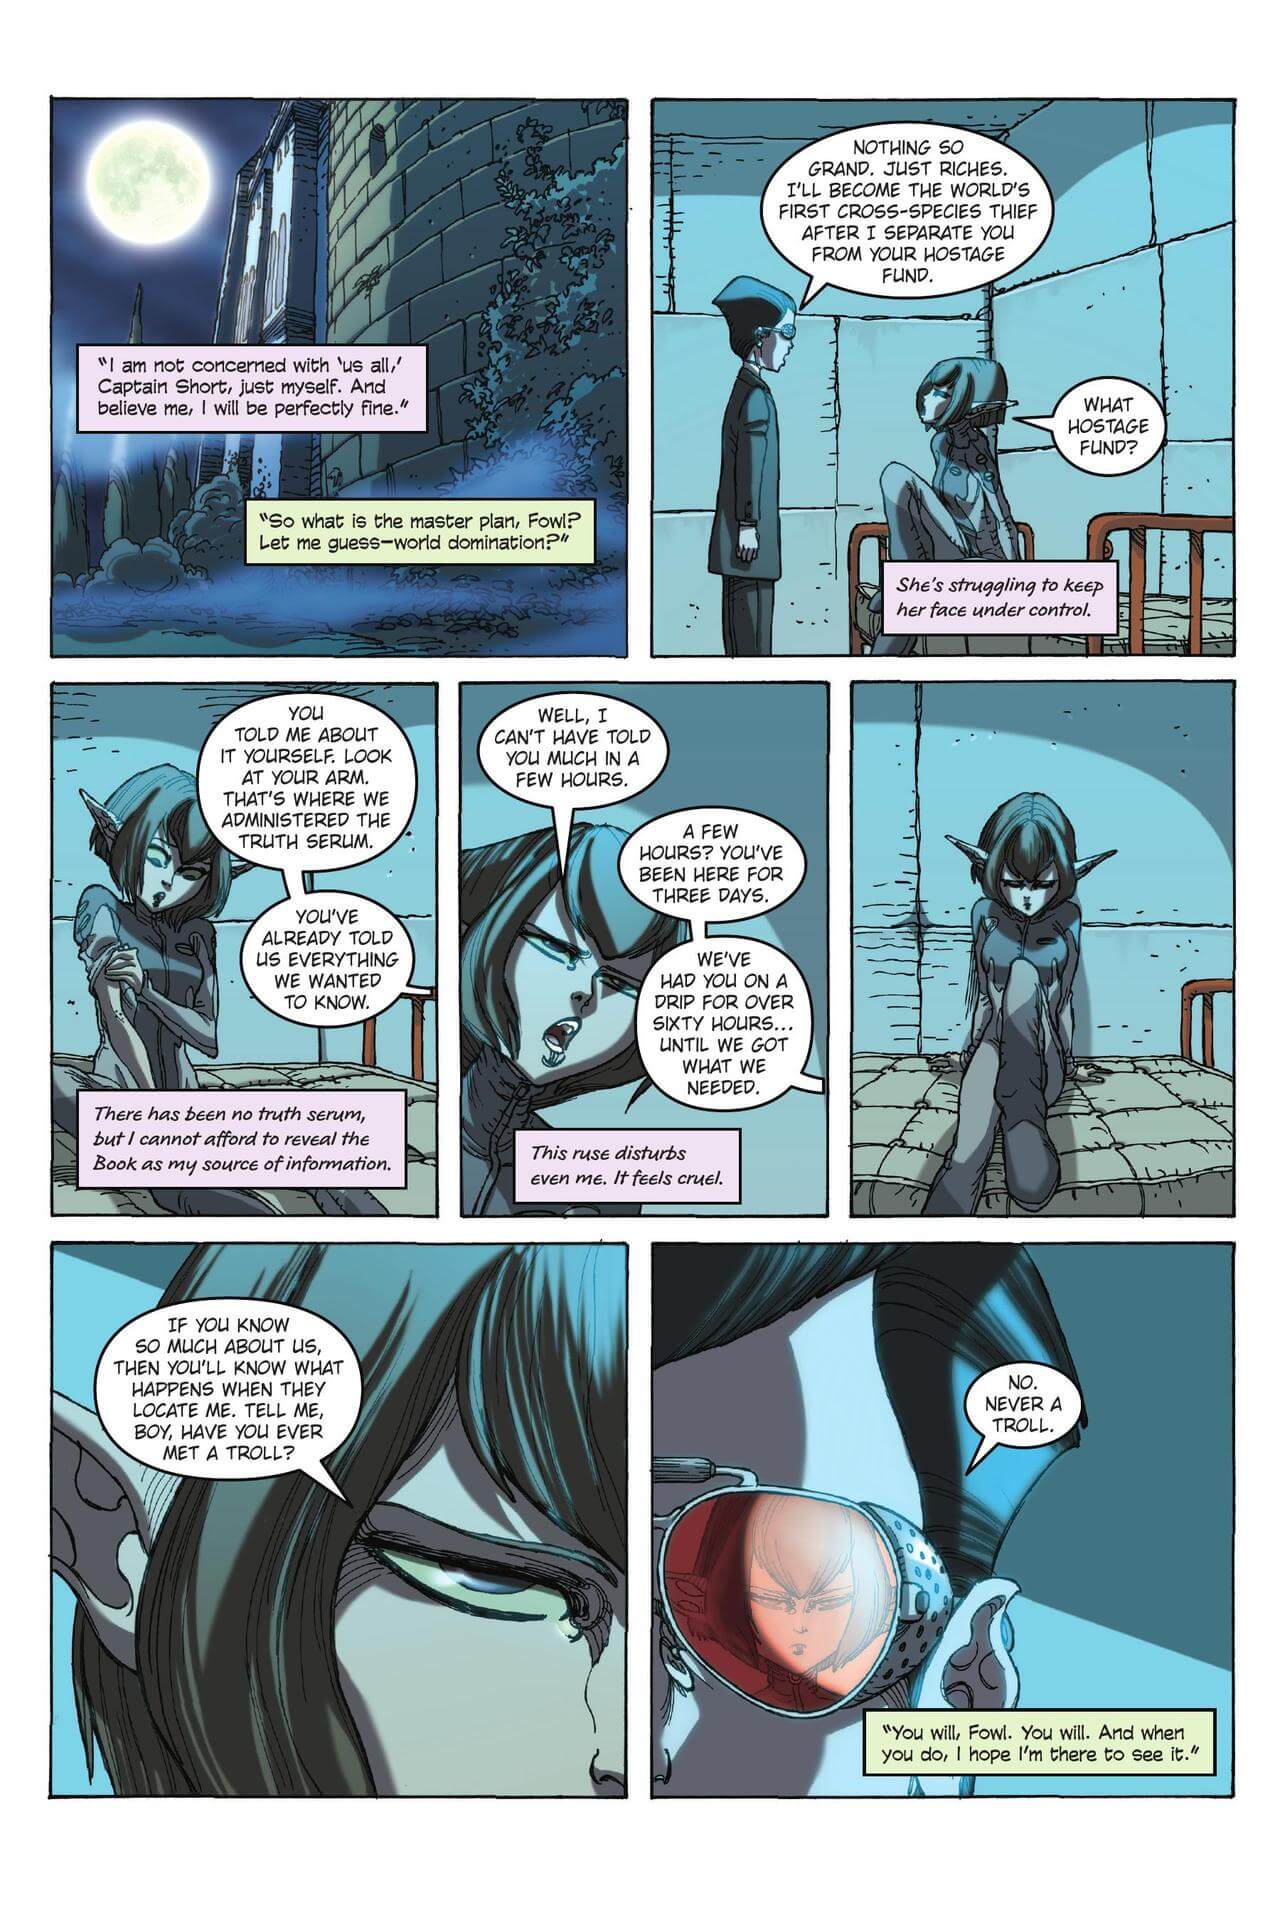 page 49 of artemis fowl the graphic novel